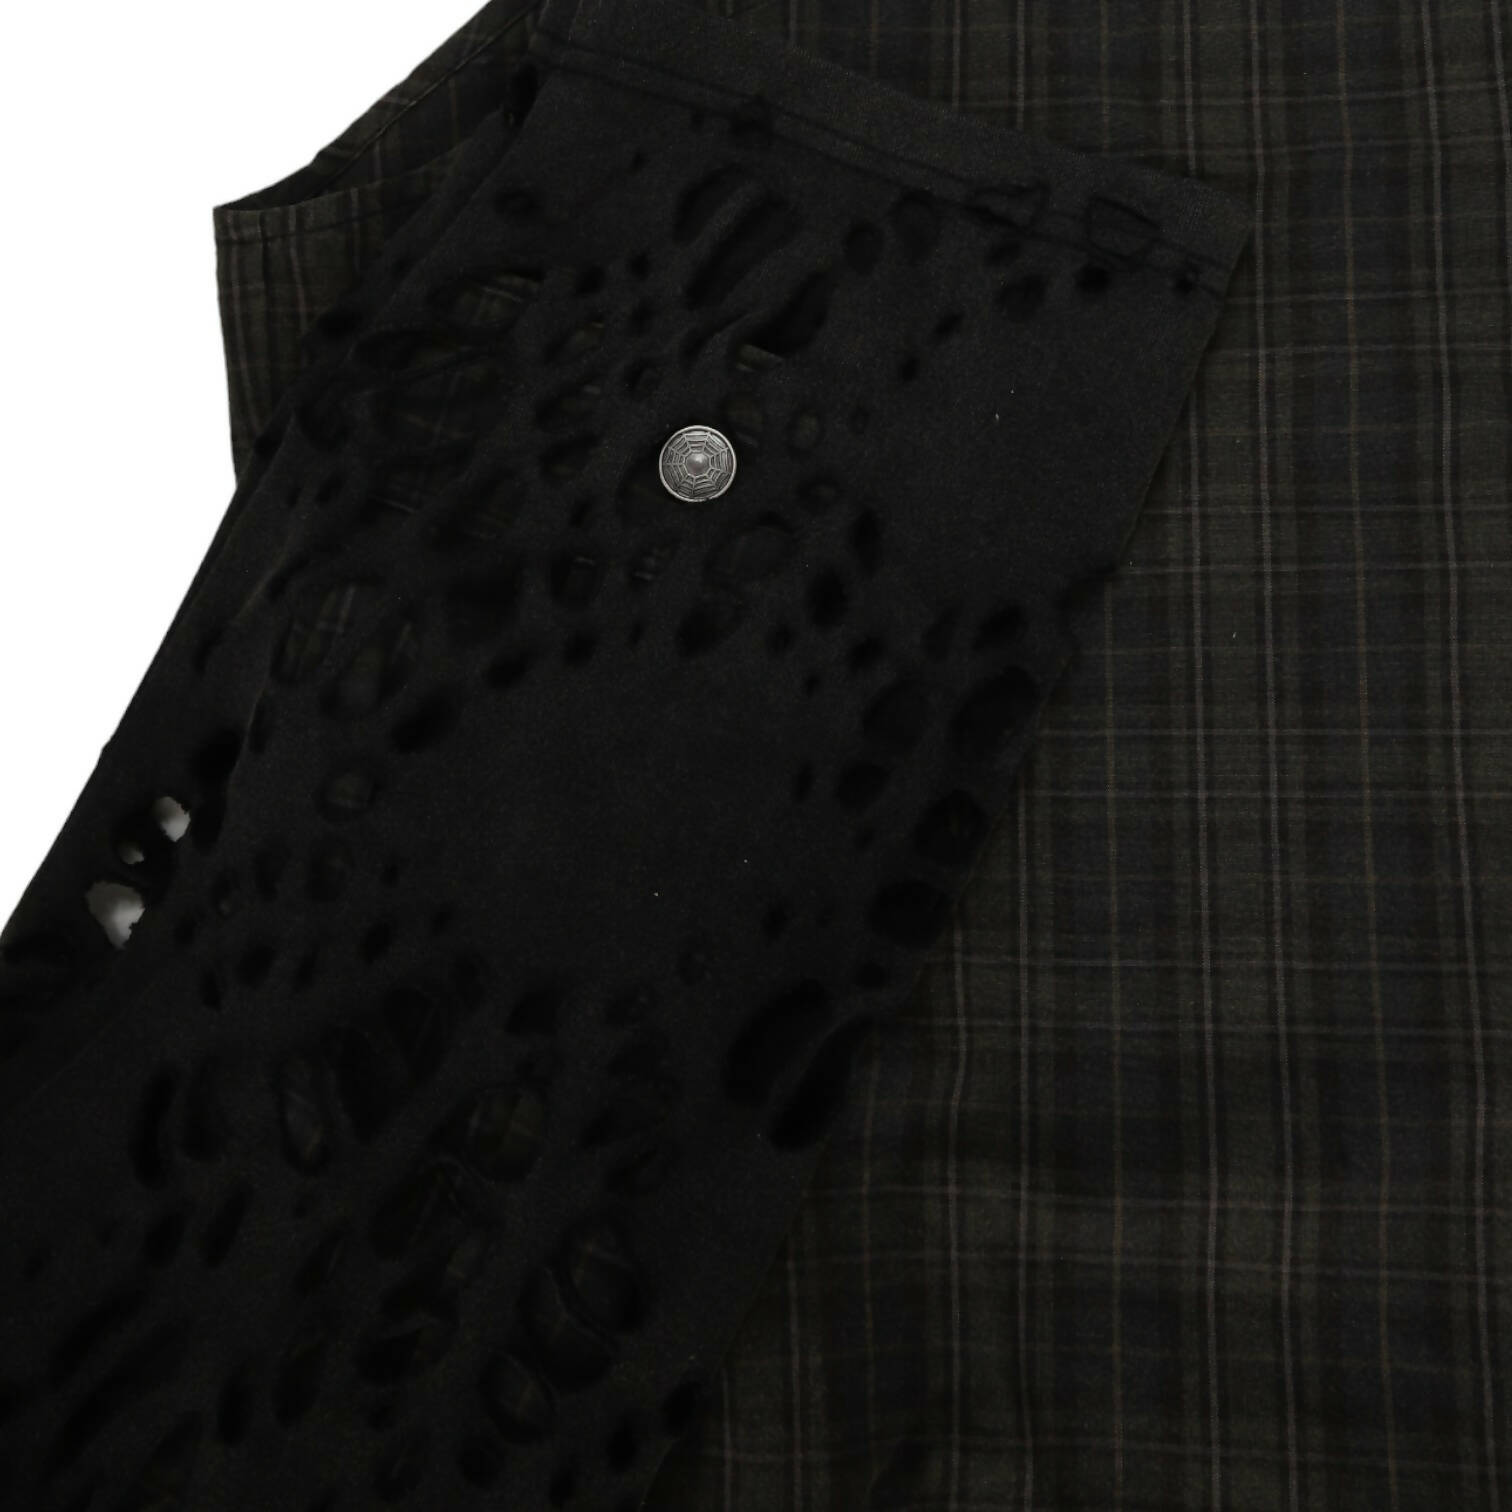 BL OVERLAPPING CROWLEY SHIRT WITH BURNEDWEB GARMENT SLEEVES